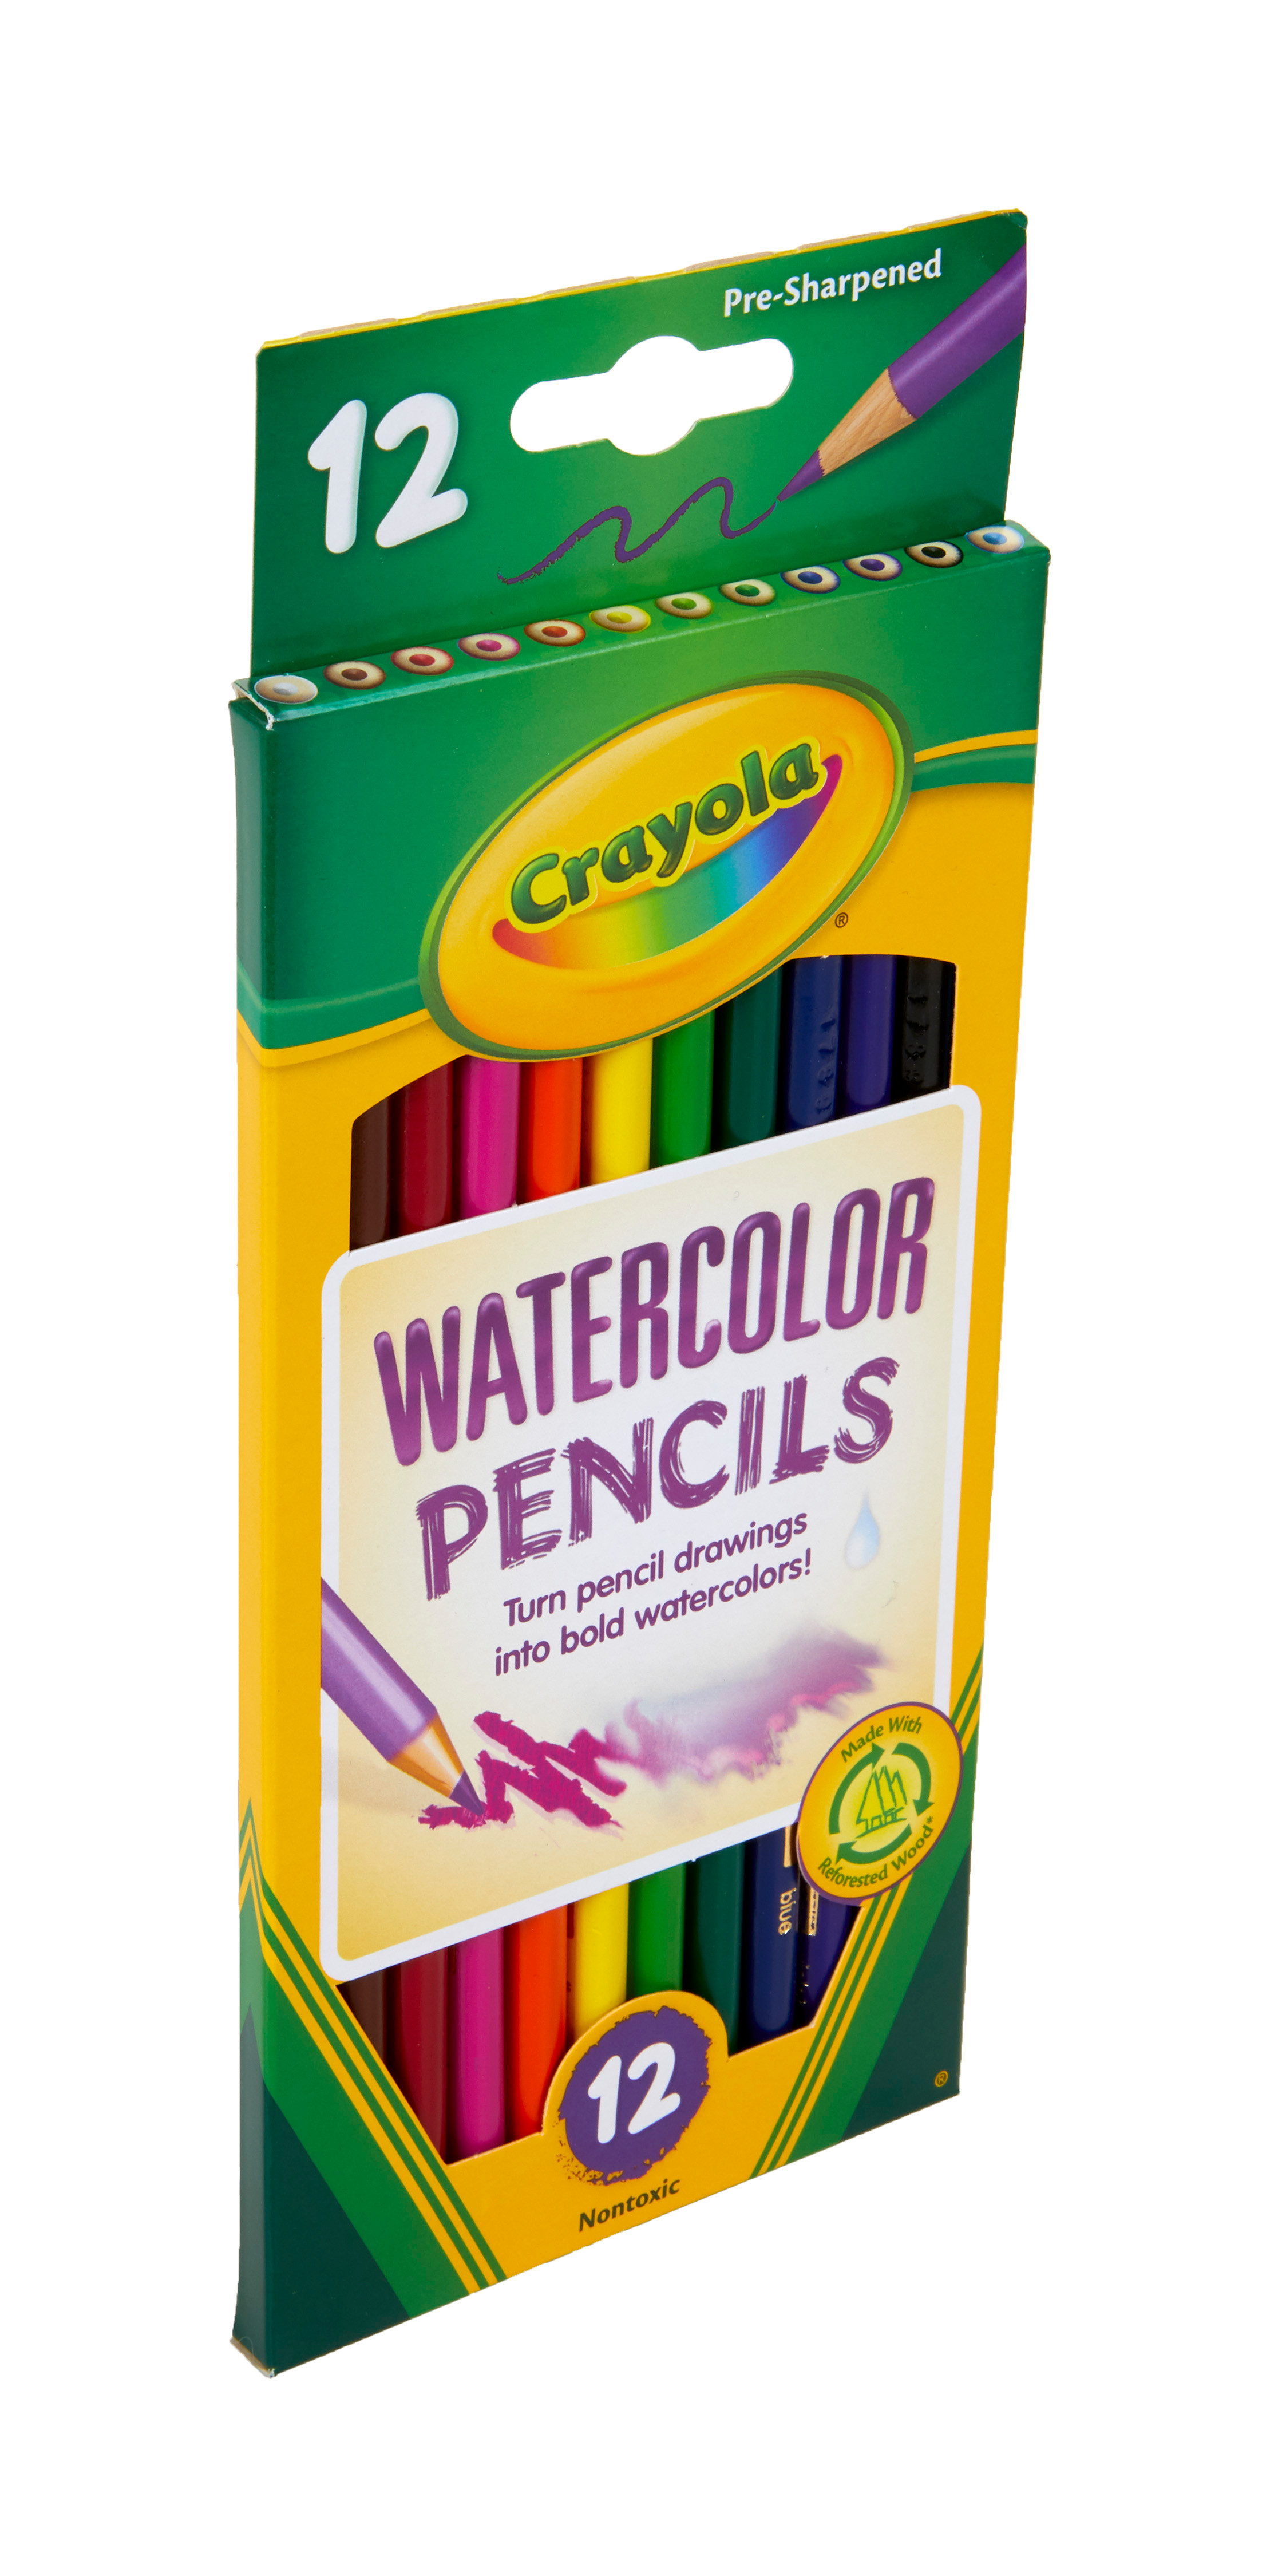 Crayola Watercolor Colored Pencils, 12 Count Use Wet or Dry - image 8 of 10